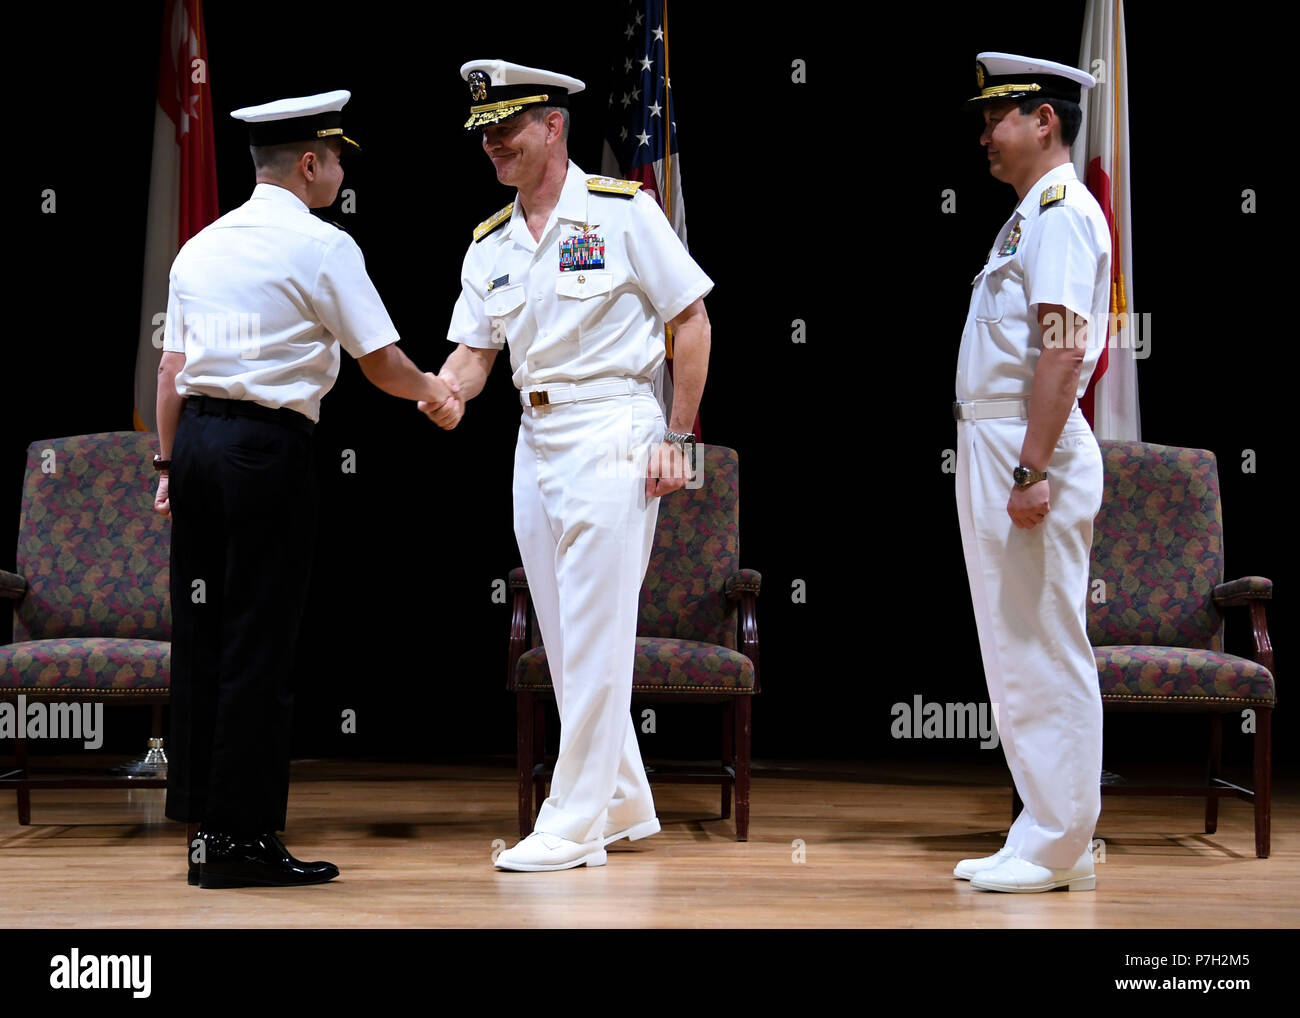 180628-N-RM440-1074 MANAMA, Bahrain (June 28, 2018) Vice Adm. Scott Stearney, middle, commander of U.S. Naval Forces Central Command, U.S. 5th Fleet and Combined Maritime Forces,  shakes the hand of Republic of Singapore Navy Rear Adm. Saw Shi Tat, oncoming commander of Combined Task Force (CTF) 151, left, during the task force's change of command ceremony on Naval Support Activity Bahrain. CTF 151's mission is to disrupt piracy at sea and to engage with regional and other partners to build capacity and improve relevant capabilities in order to protect global maritime commerce and secure freed Stock Photo